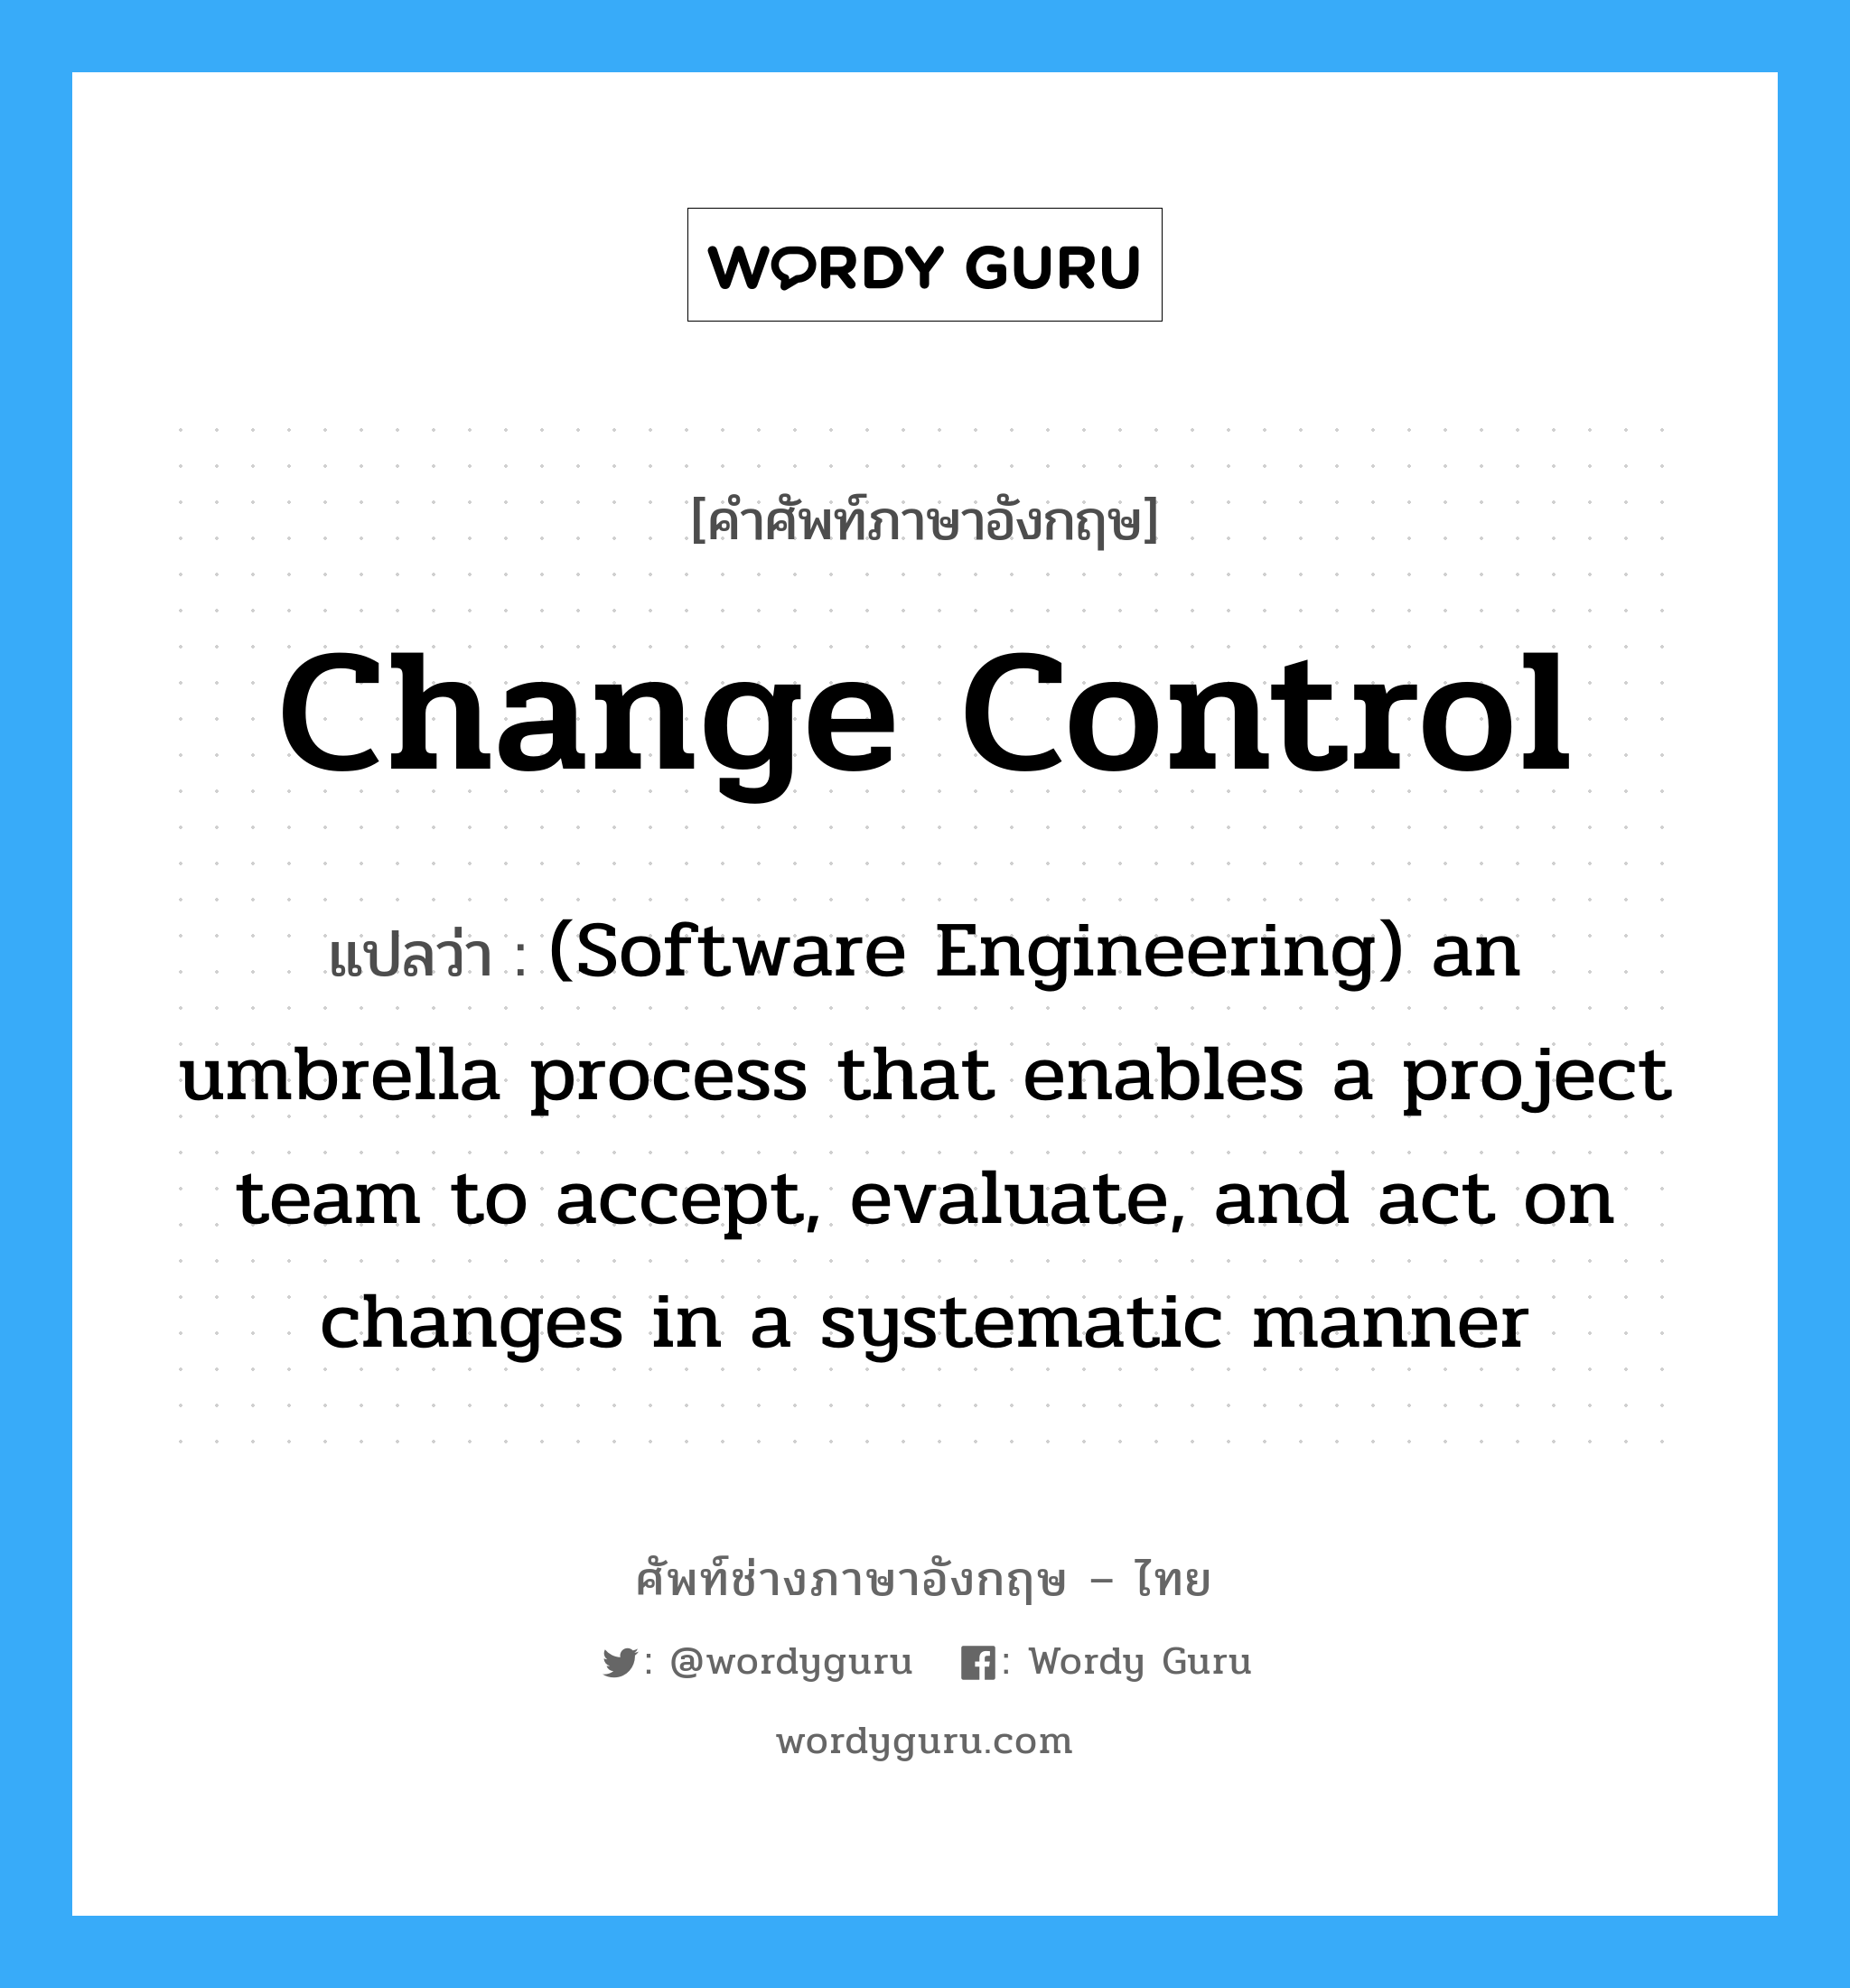 (Software Engineering) an umbrella process that enables a project team to accept, evaluate, and act on changes in a systematic manner ภาษาอังกฤษ?, คำศัพท์ช่างภาษาอังกฤษ - ไทย (Software Engineering) an umbrella process that enables a project team to accept, evaluate, and act on changes in a systematic manner คำศัพท์ภาษาอังกฤษ (Software Engineering) an umbrella process that enables a project team to accept, evaluate, and act on changes in a systematic manner แปลว่า Change control